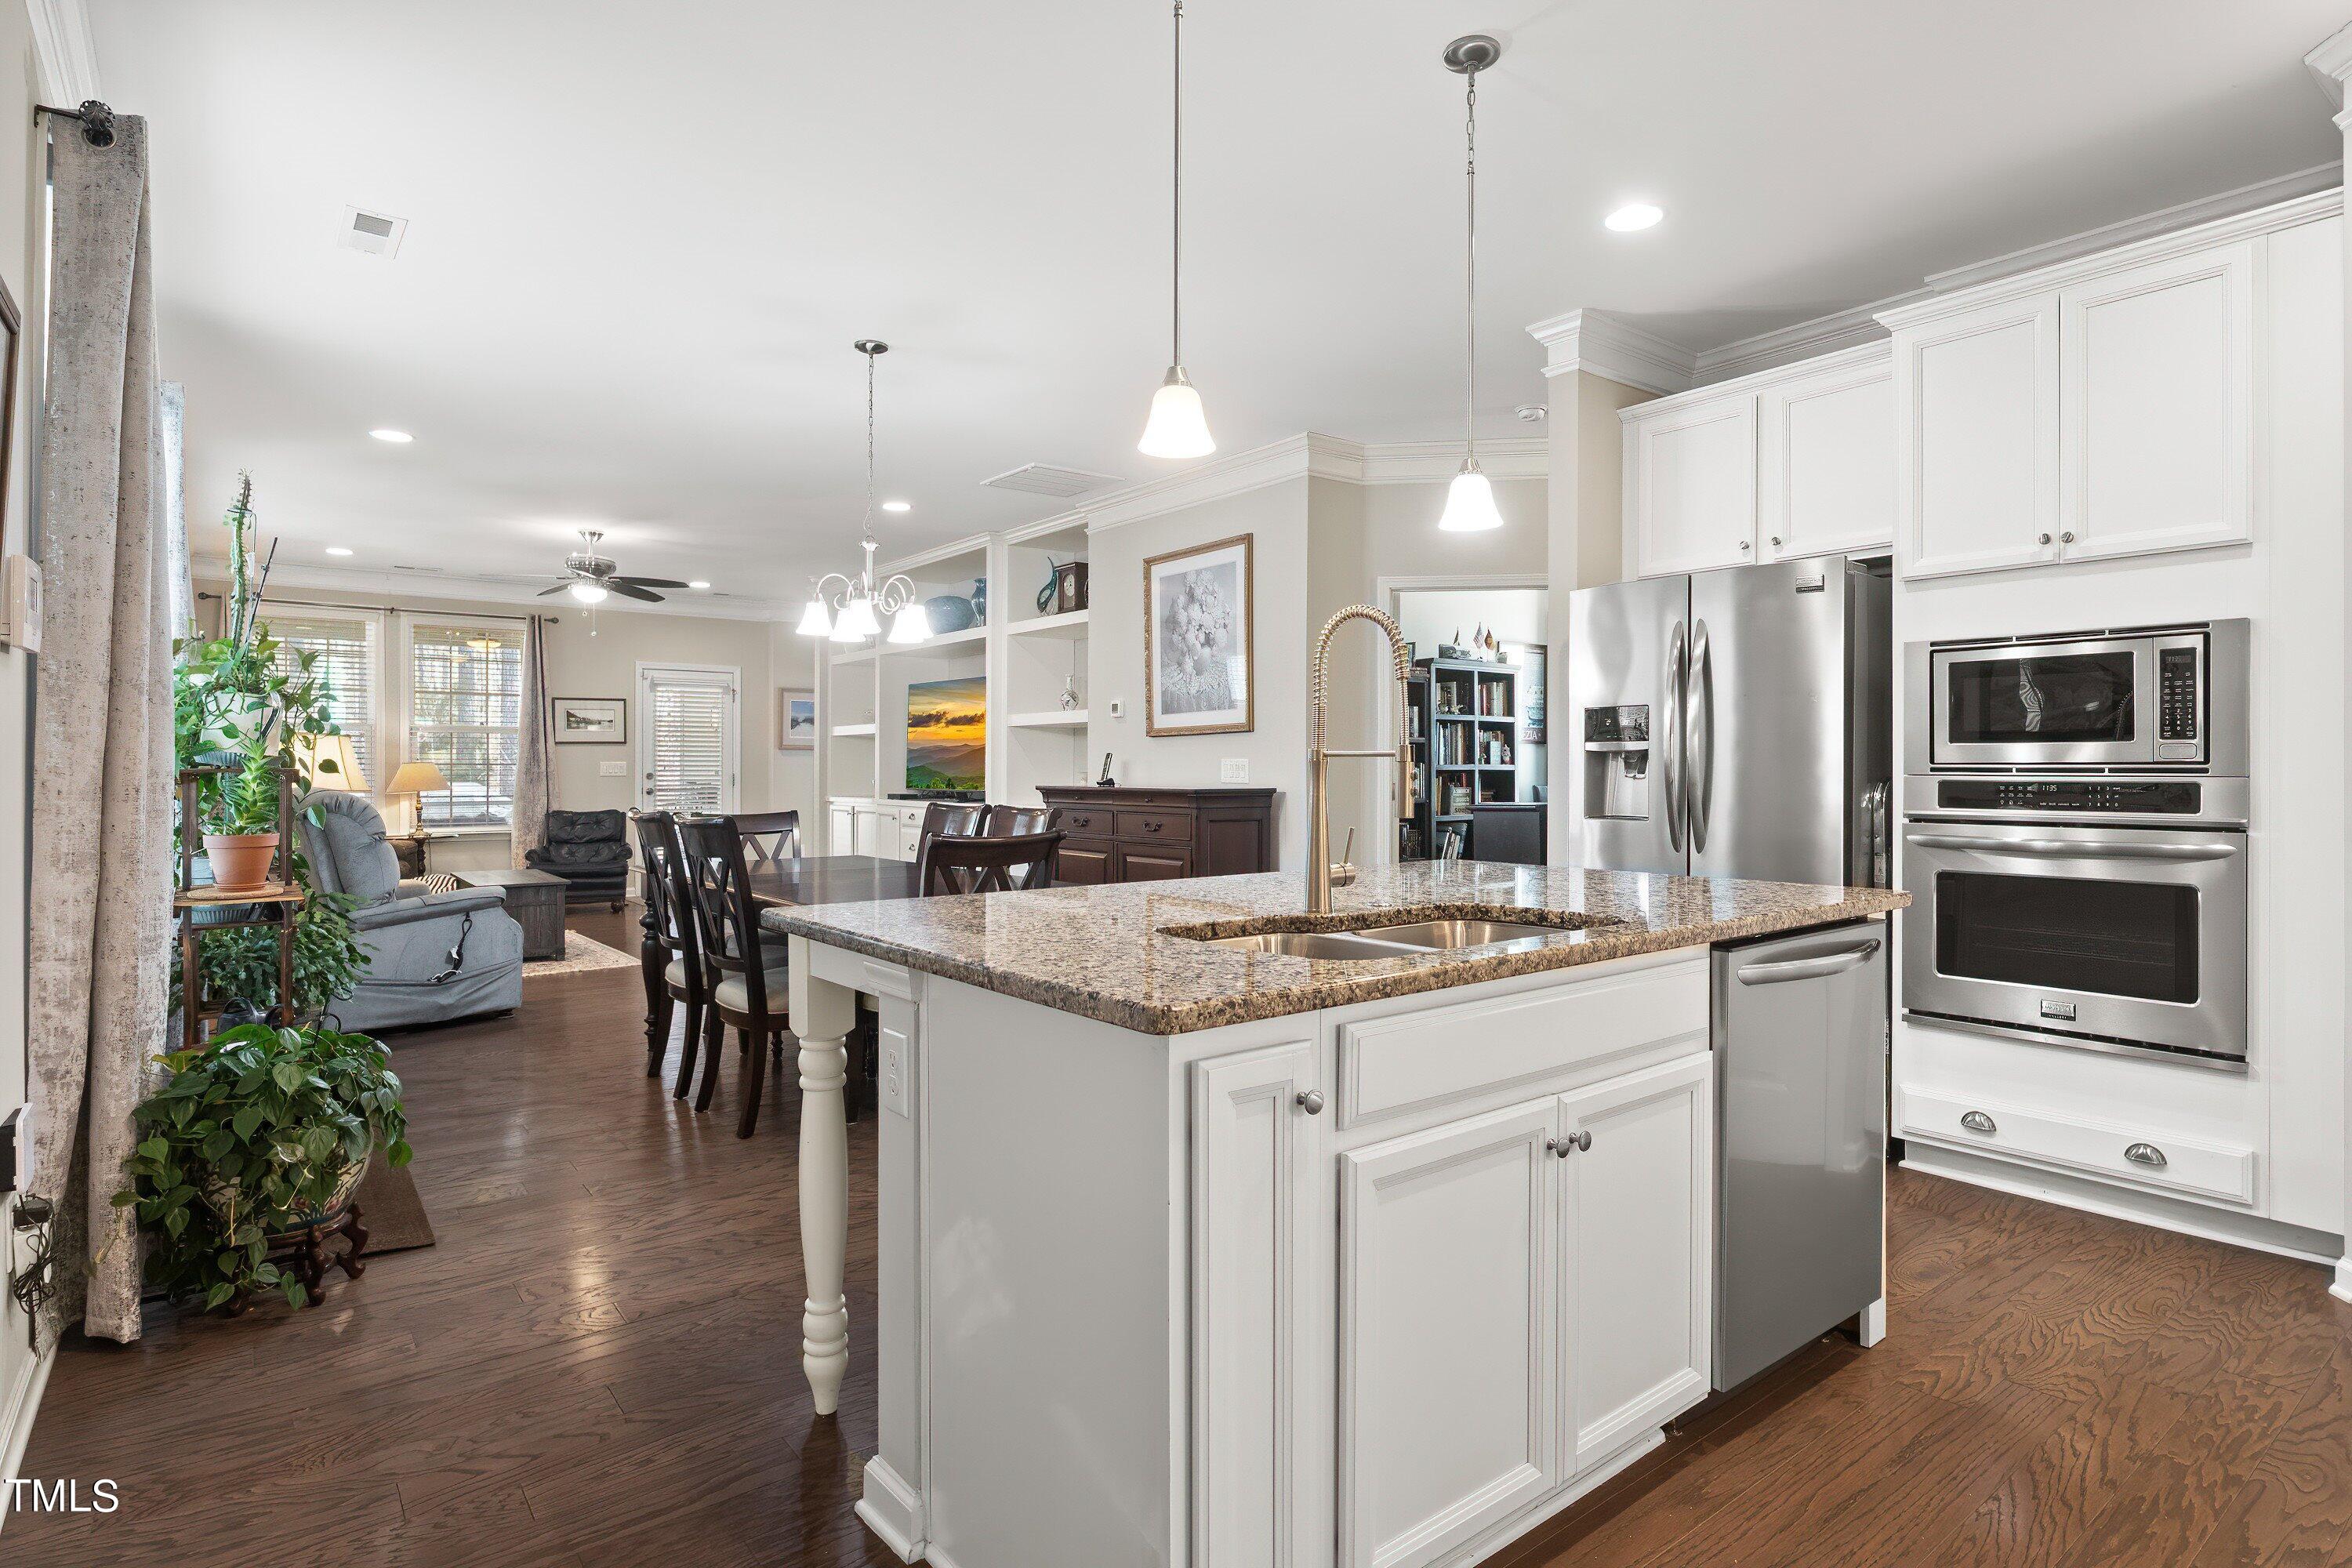 a kitchen with stainless steel appliances kitchen island granite countertop a large island a stove a refrigerator a sink a dining table and chairs with wooden floor